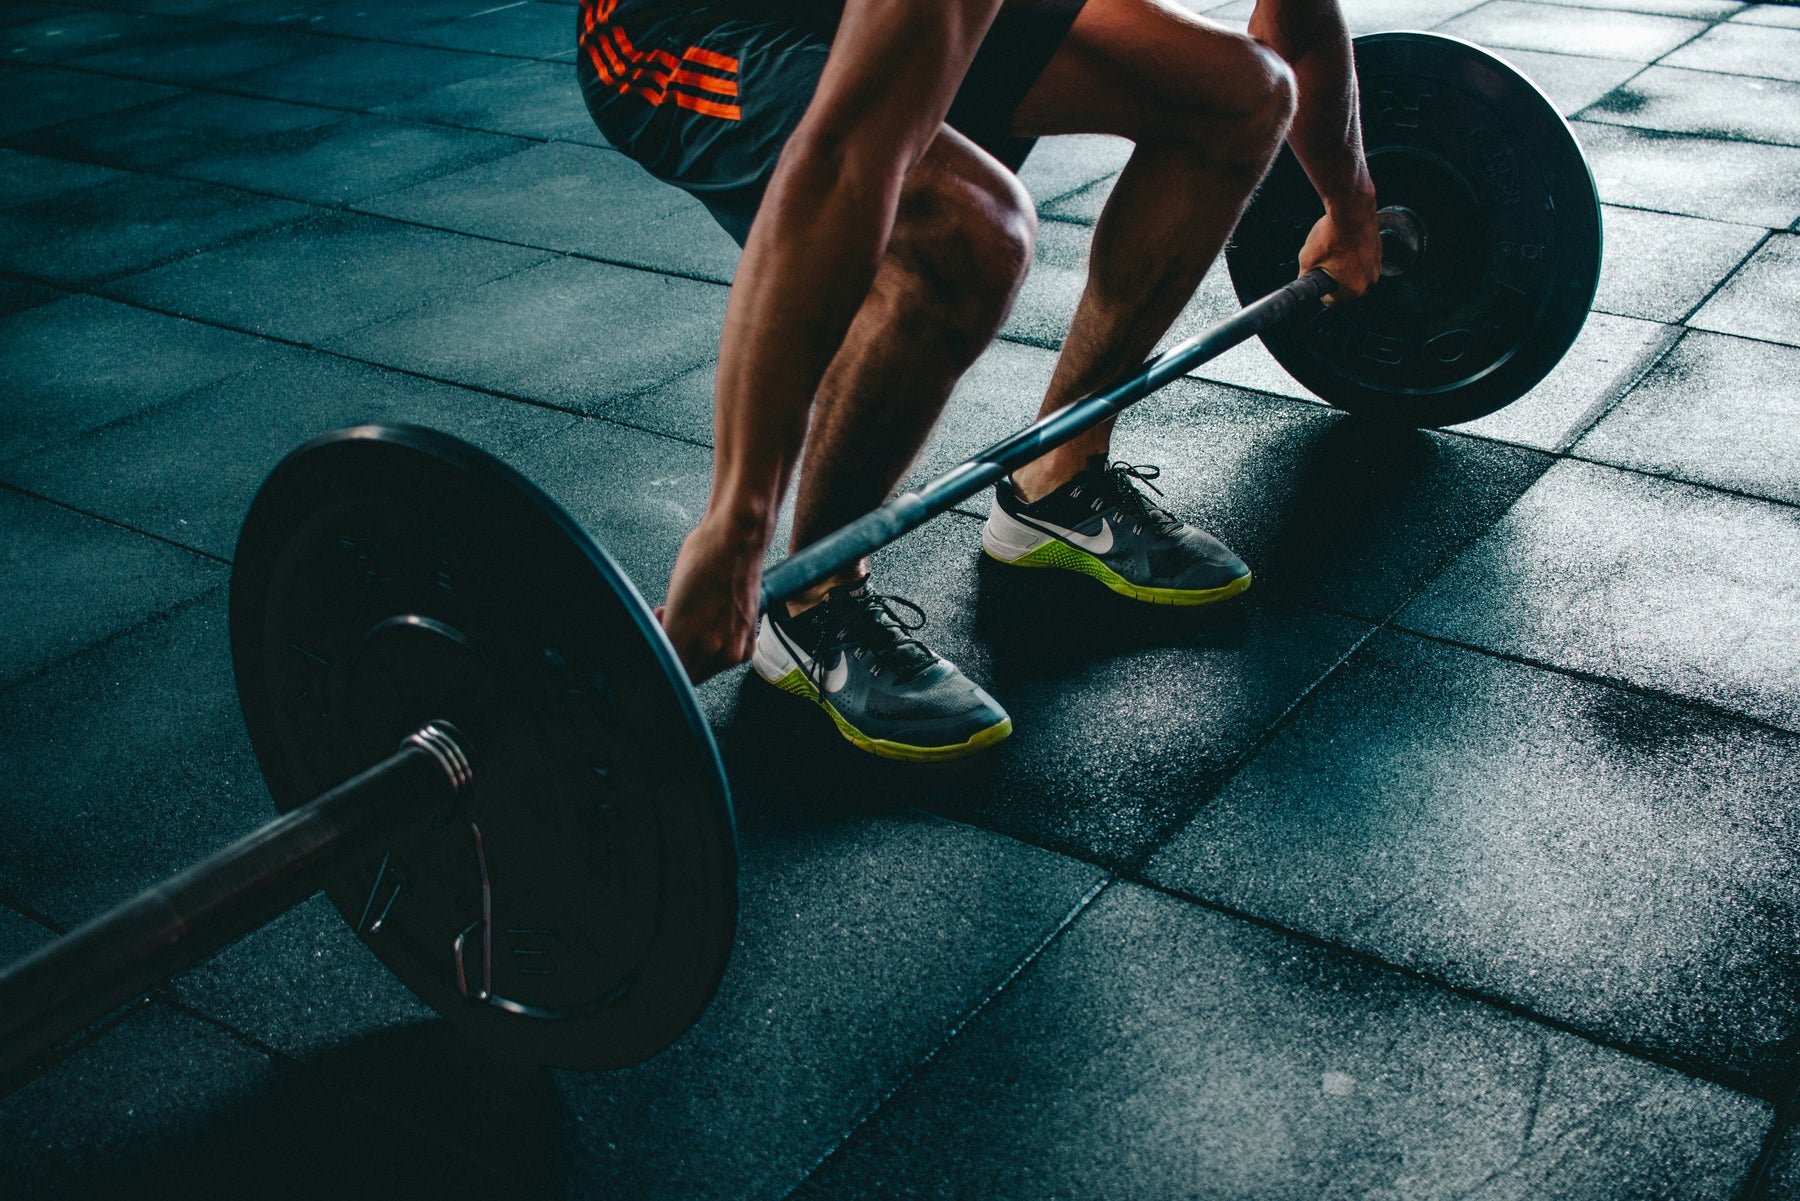 How to Clean Rubber Gym Floor: The Best Way to Clean Rubber Gym Floor Mats